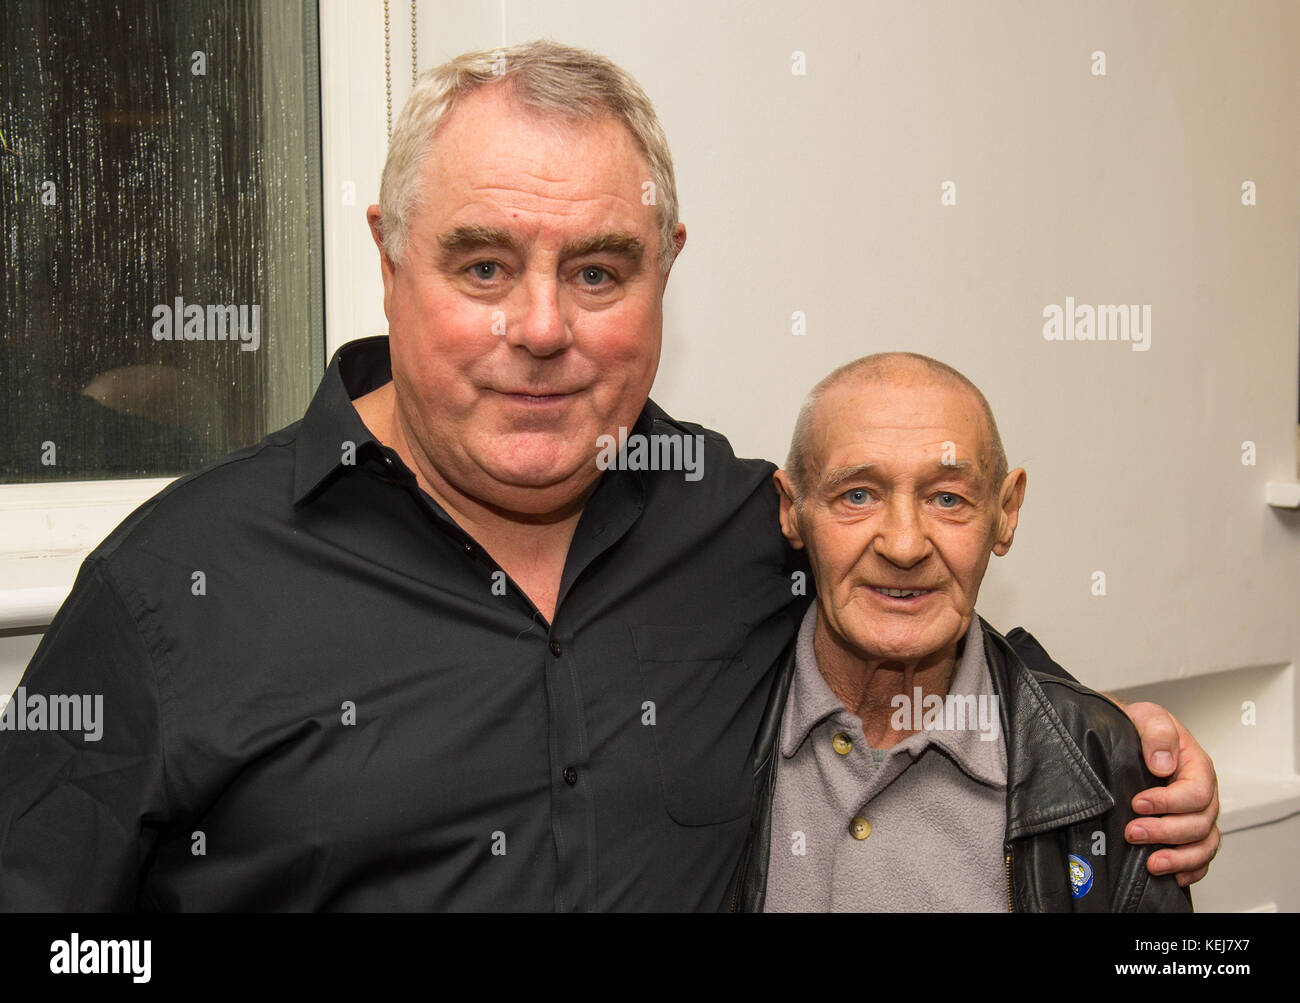 Author Richard O'Rawe (left) with Paddy Hill, who was wrongly convicted for the Birmingham bombing as part of the Birmingham Six, during the launch of the book, &Ocirc;In the Name of the Son&Otilde;, the story of Gerry Conlon, about Guildford Four's Gerry Conlon at the London Irish Centre in Camden. Stock Photo